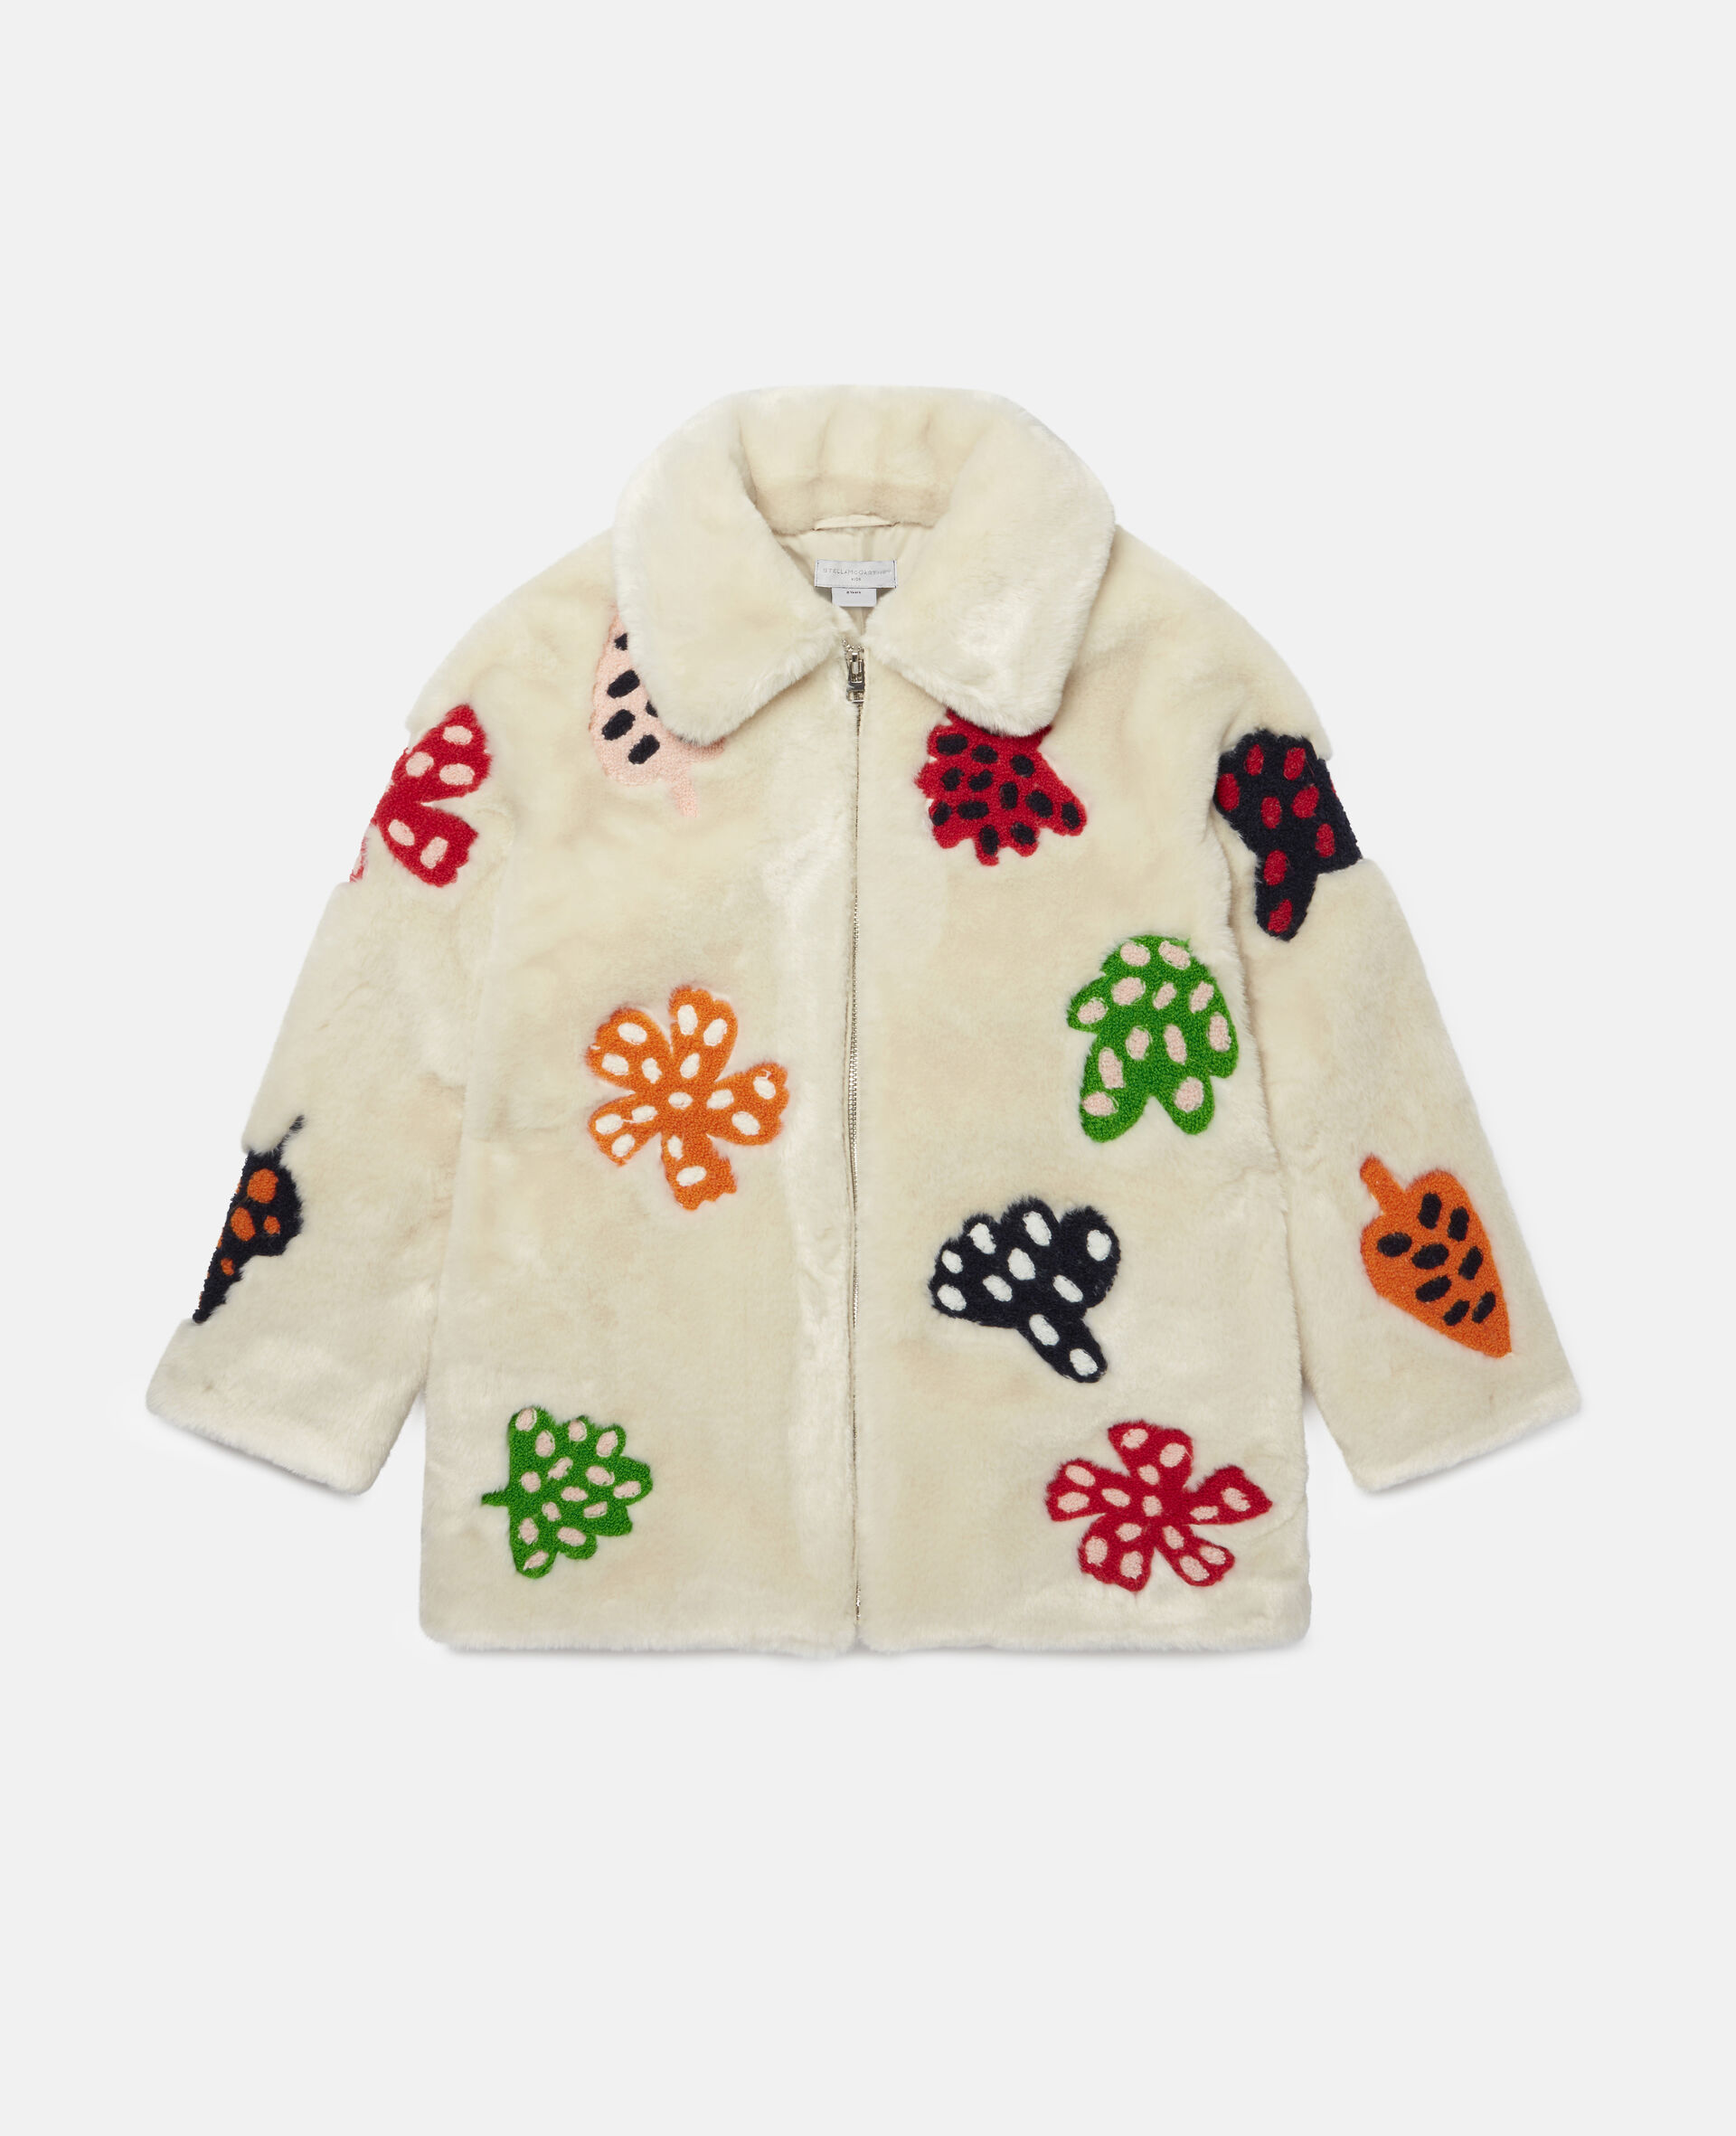 Embroidered Spotty Leaves FFF Jacket -White-large